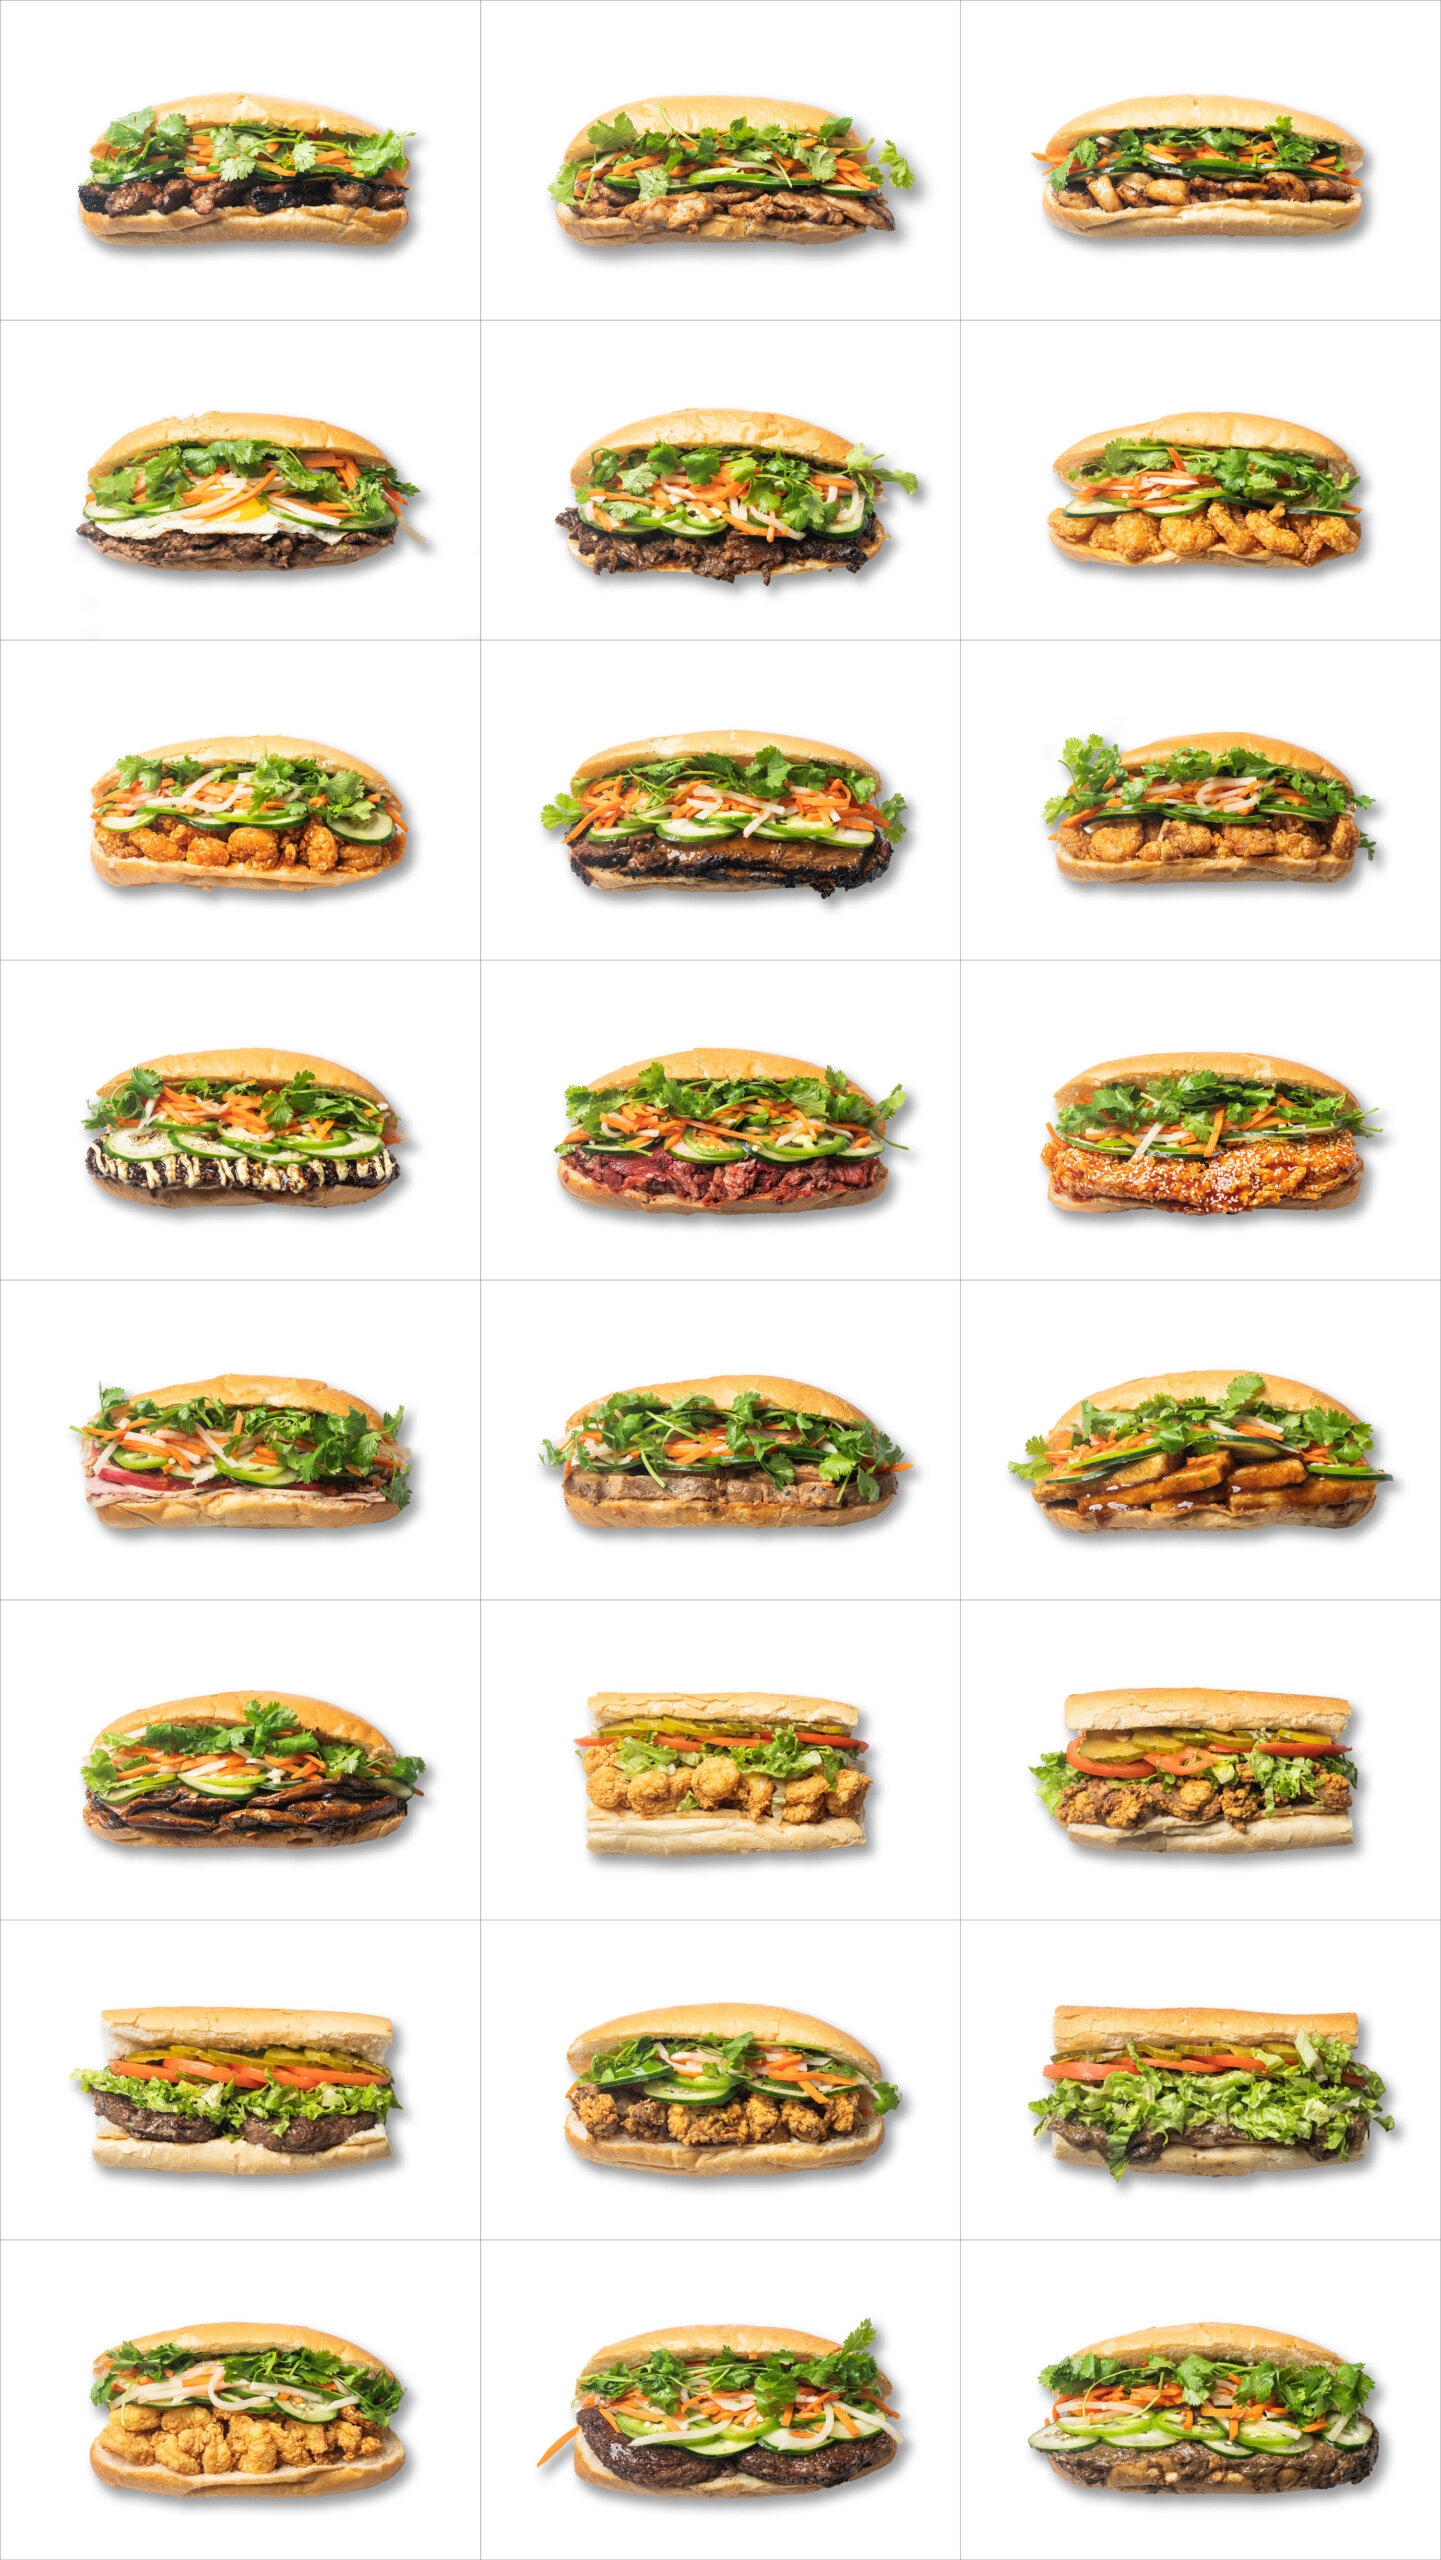 A grid of 24 different banh mi and poboy sandwiches, each with assorted ingredients like lettuce, cheese, tomatoes, and various meats, displayed against a plain white background.